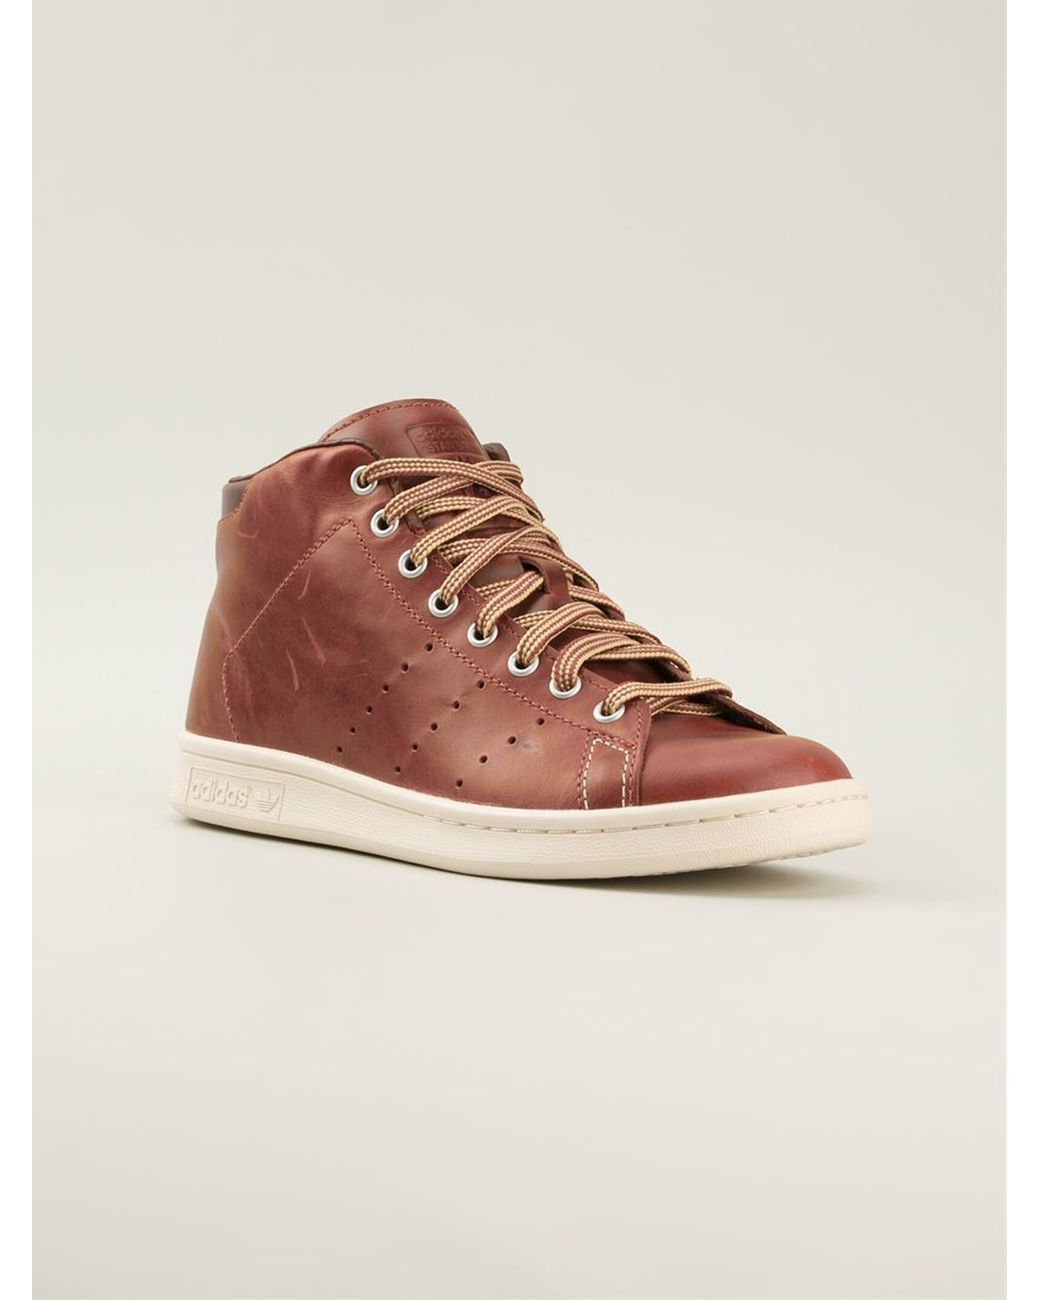 adidas Stan Smith Mid Trainers in Brown Lyst